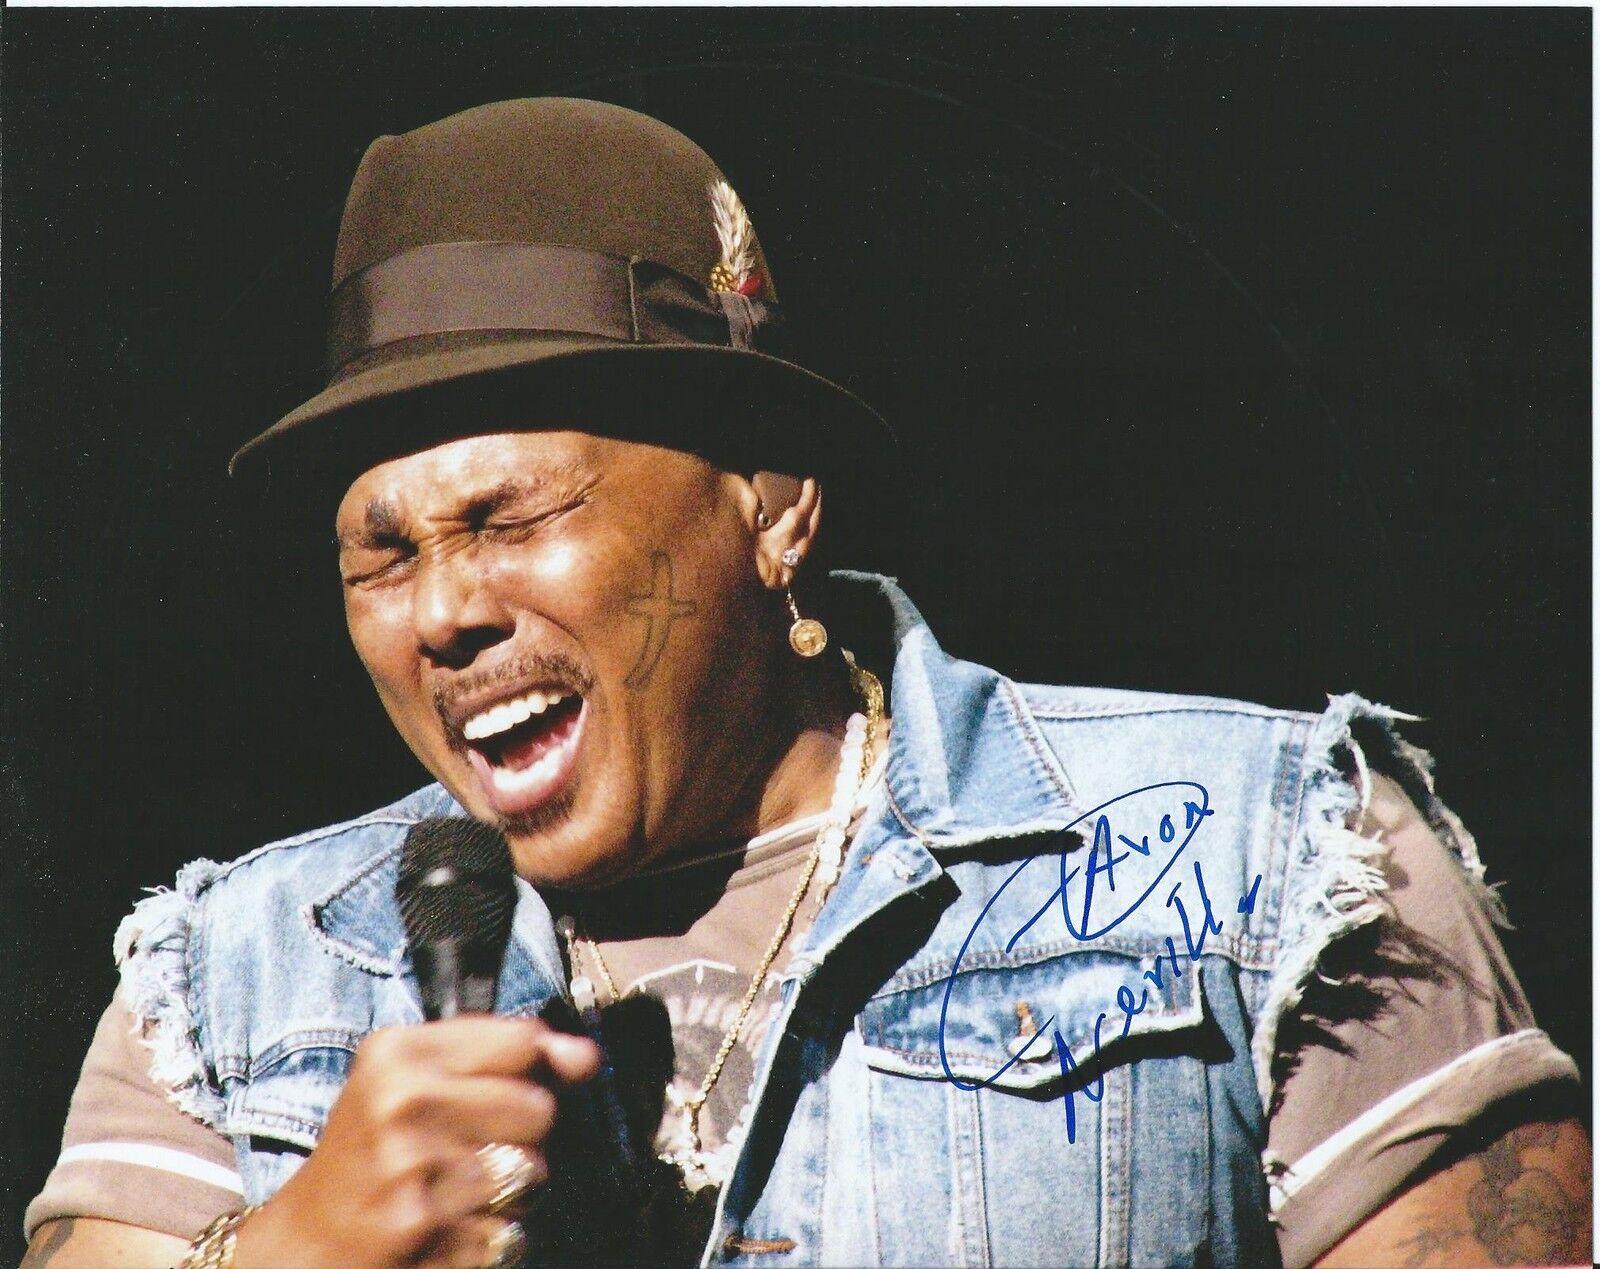 Aaron Neville *THE NEVILLE BROTHERS* Signed 8x10 Photo Poster painting AD3 COA GFA PROOF!